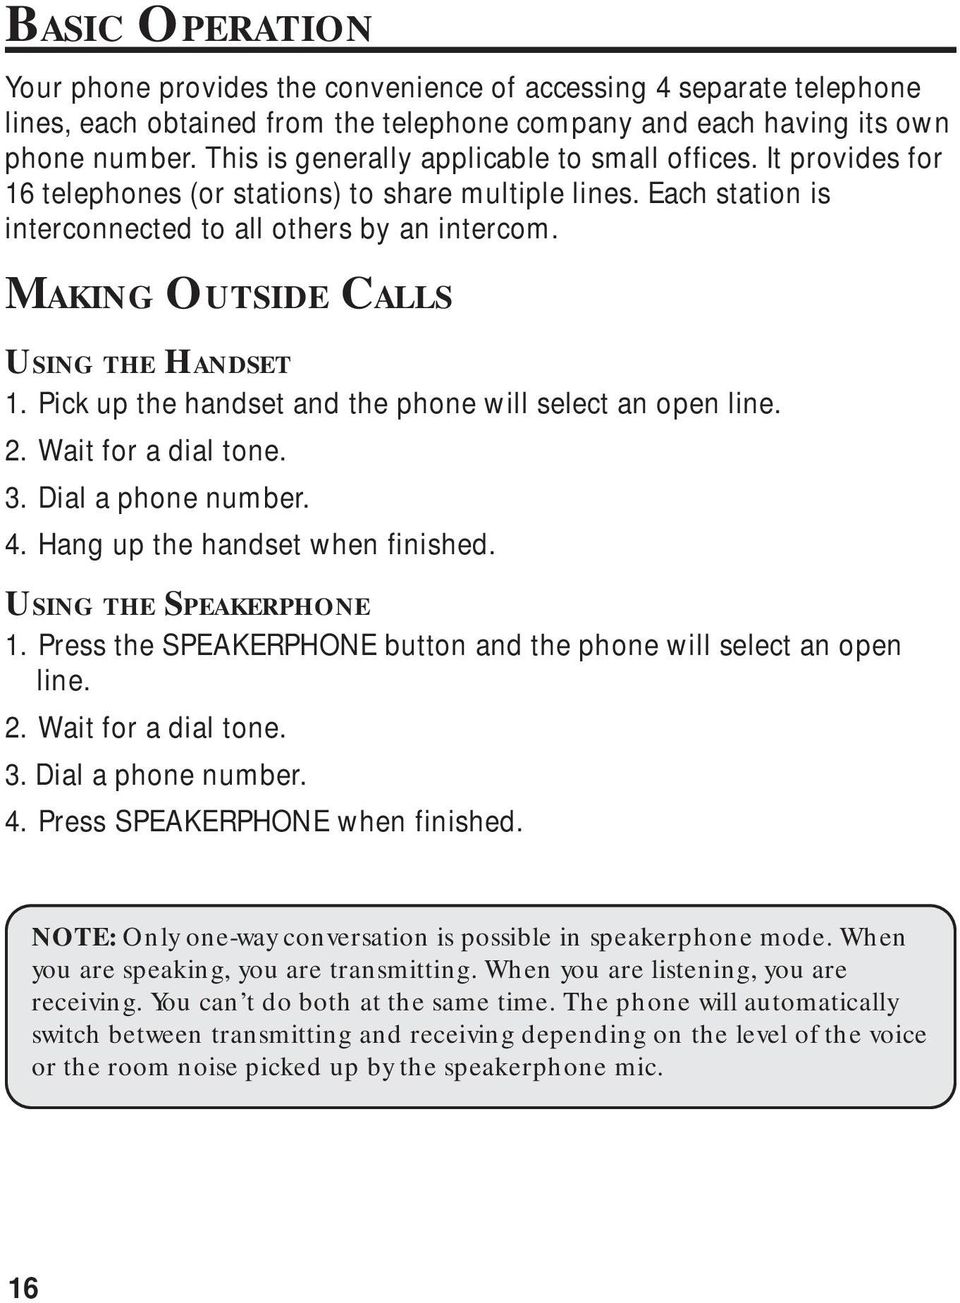 MAKING OUTSIDE CALLS USING THE HANDSET 1. Pick up the handset and the phone will select an open line. 2. Wait for a dial tone. 3. Dial a phone number. 4. Hang up the handset when finished.